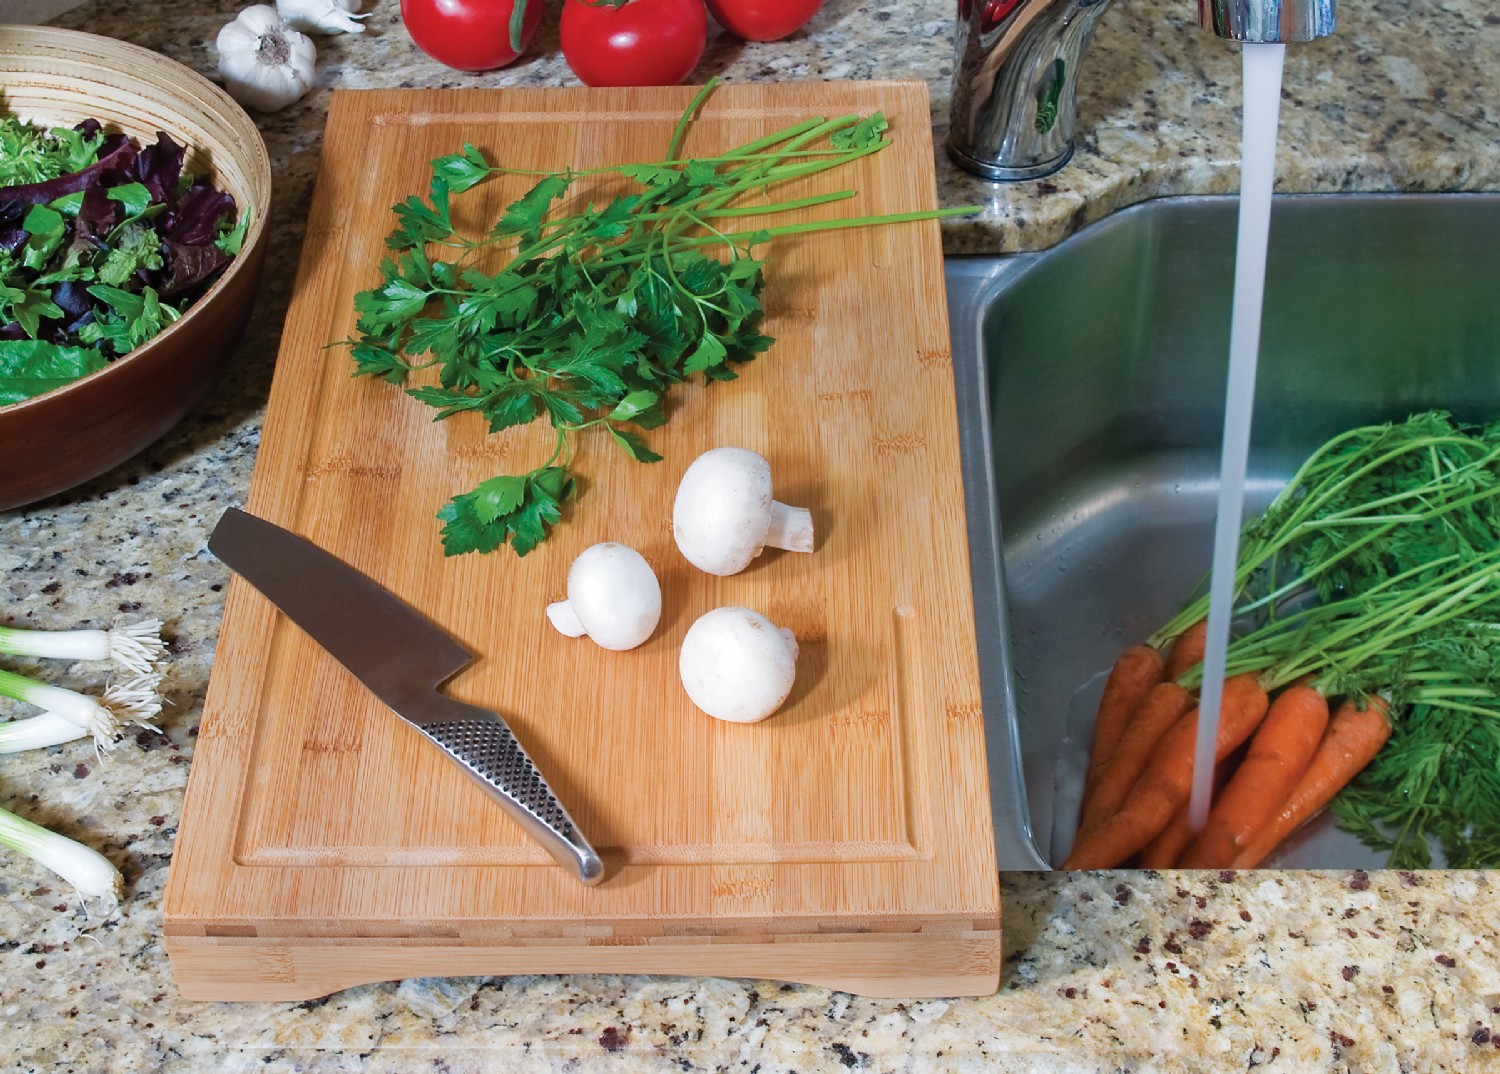 Bamboo Over-the-Sink Expandable Cutting Board